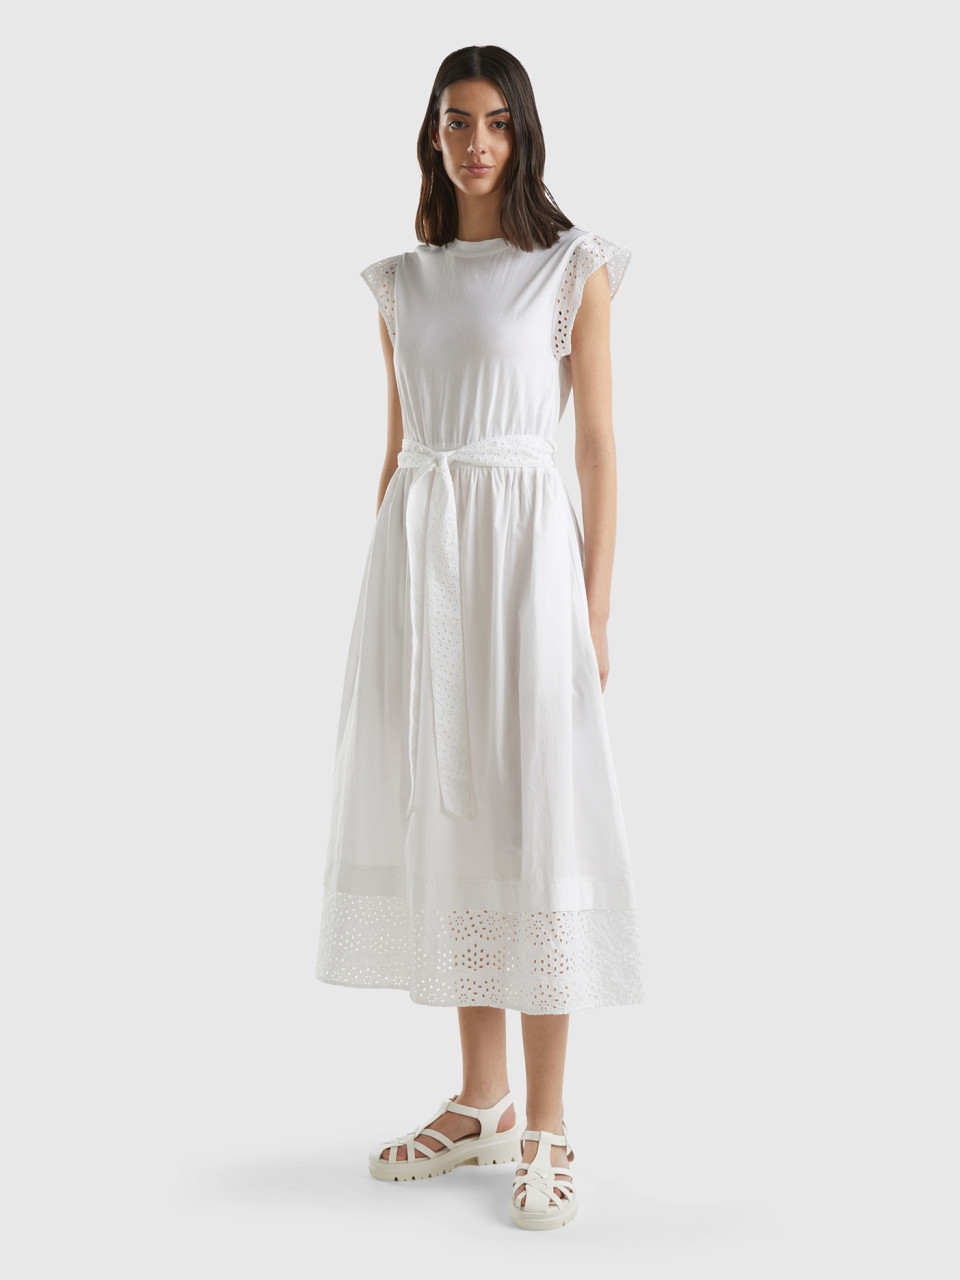 Benetton, Dress With Broderie Anglaise, White, Women